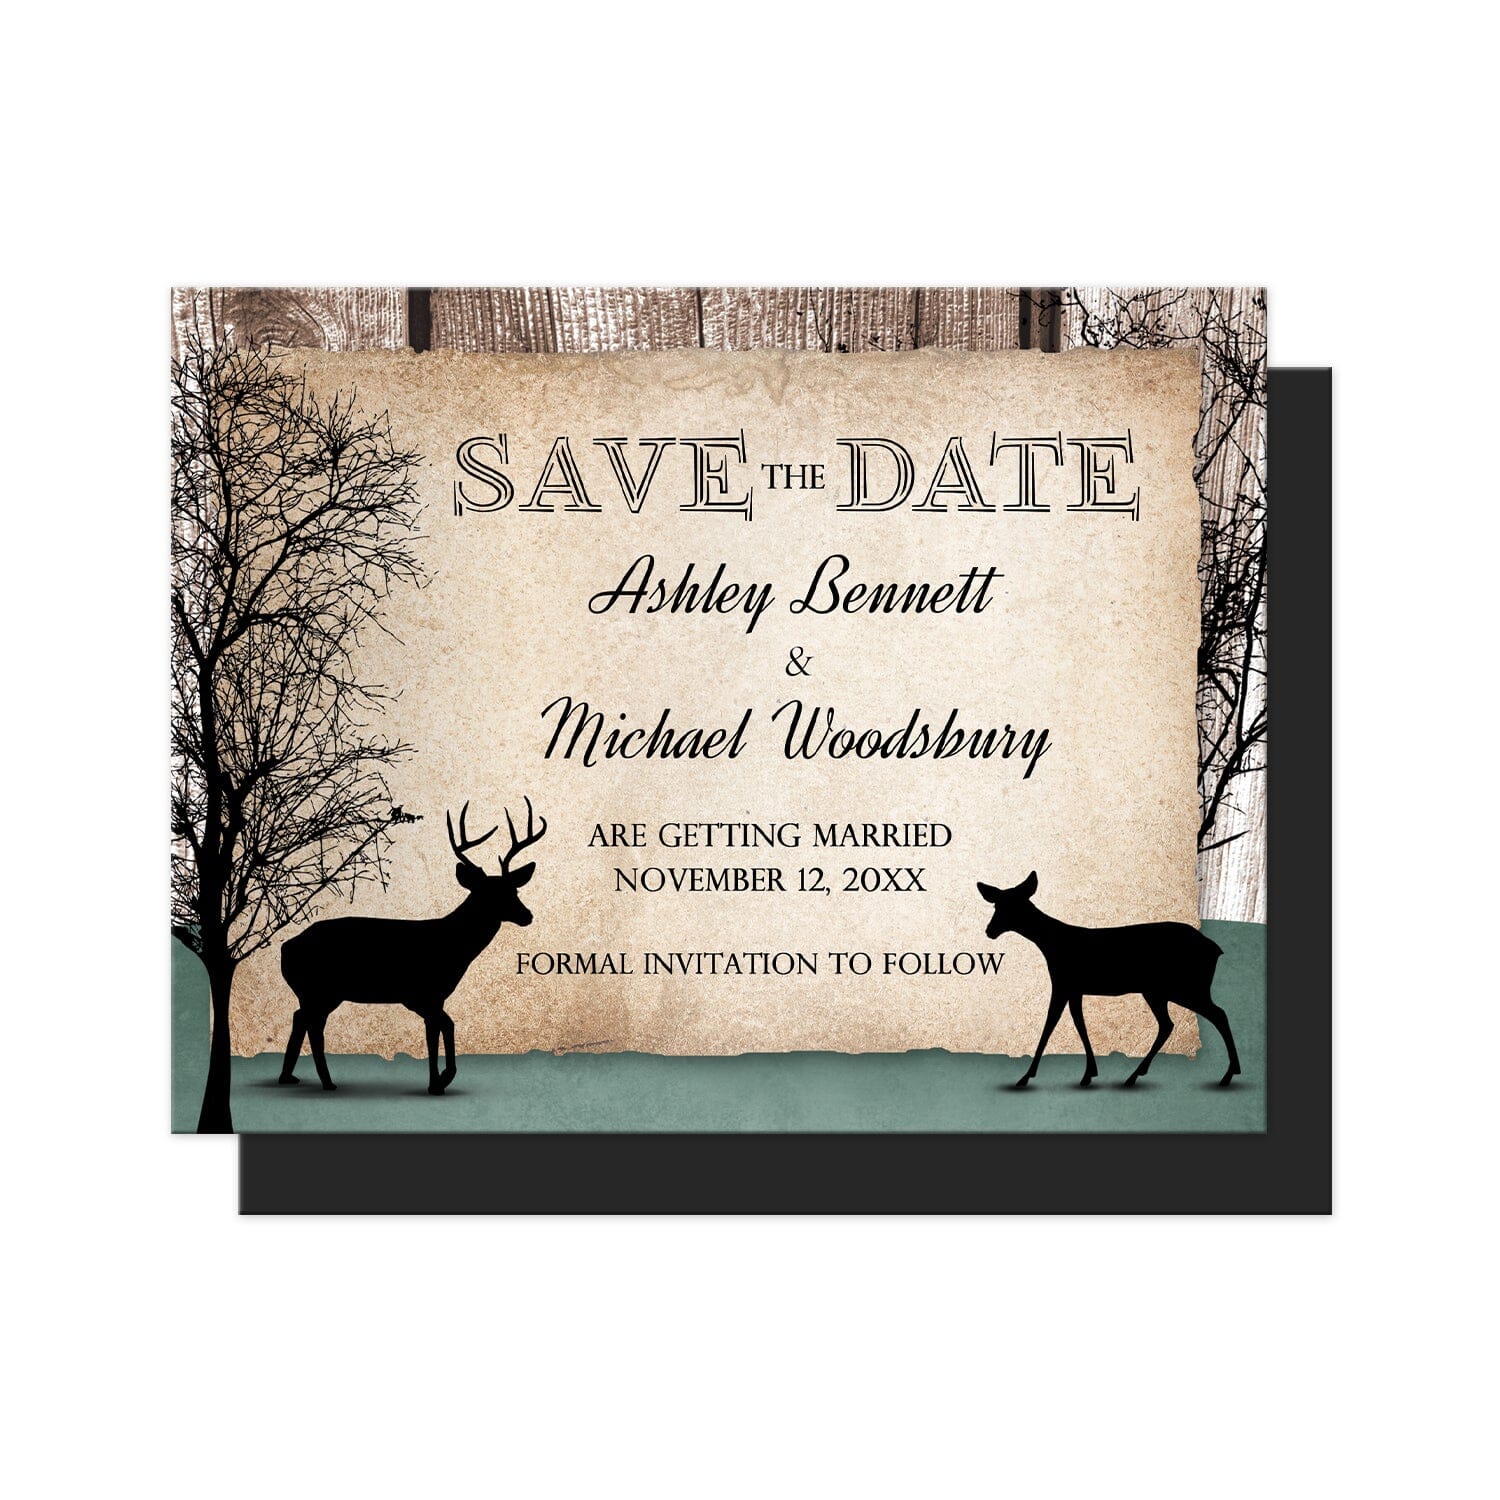 Festive Occasion Thanksgiving Save The Date Magnet - Magnets and Labels